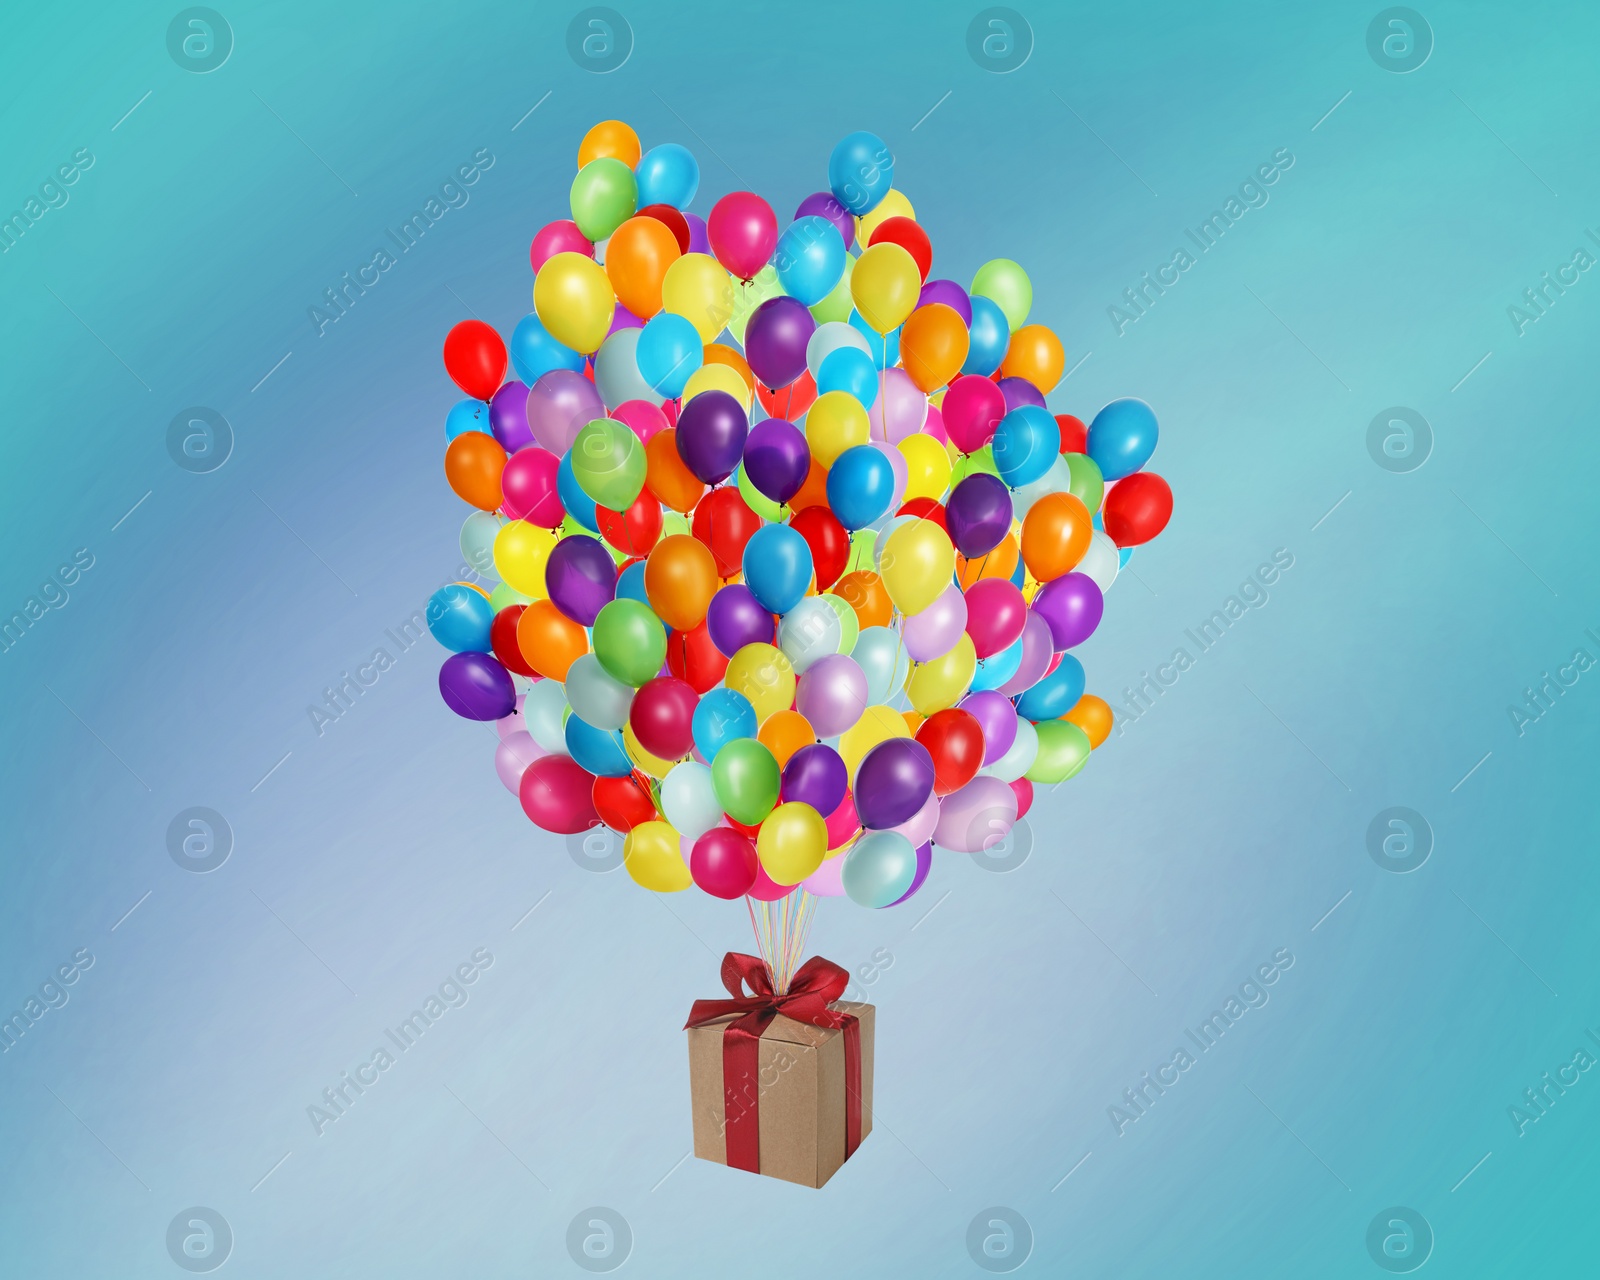 Image of Many balloons tied to gift box on bright background